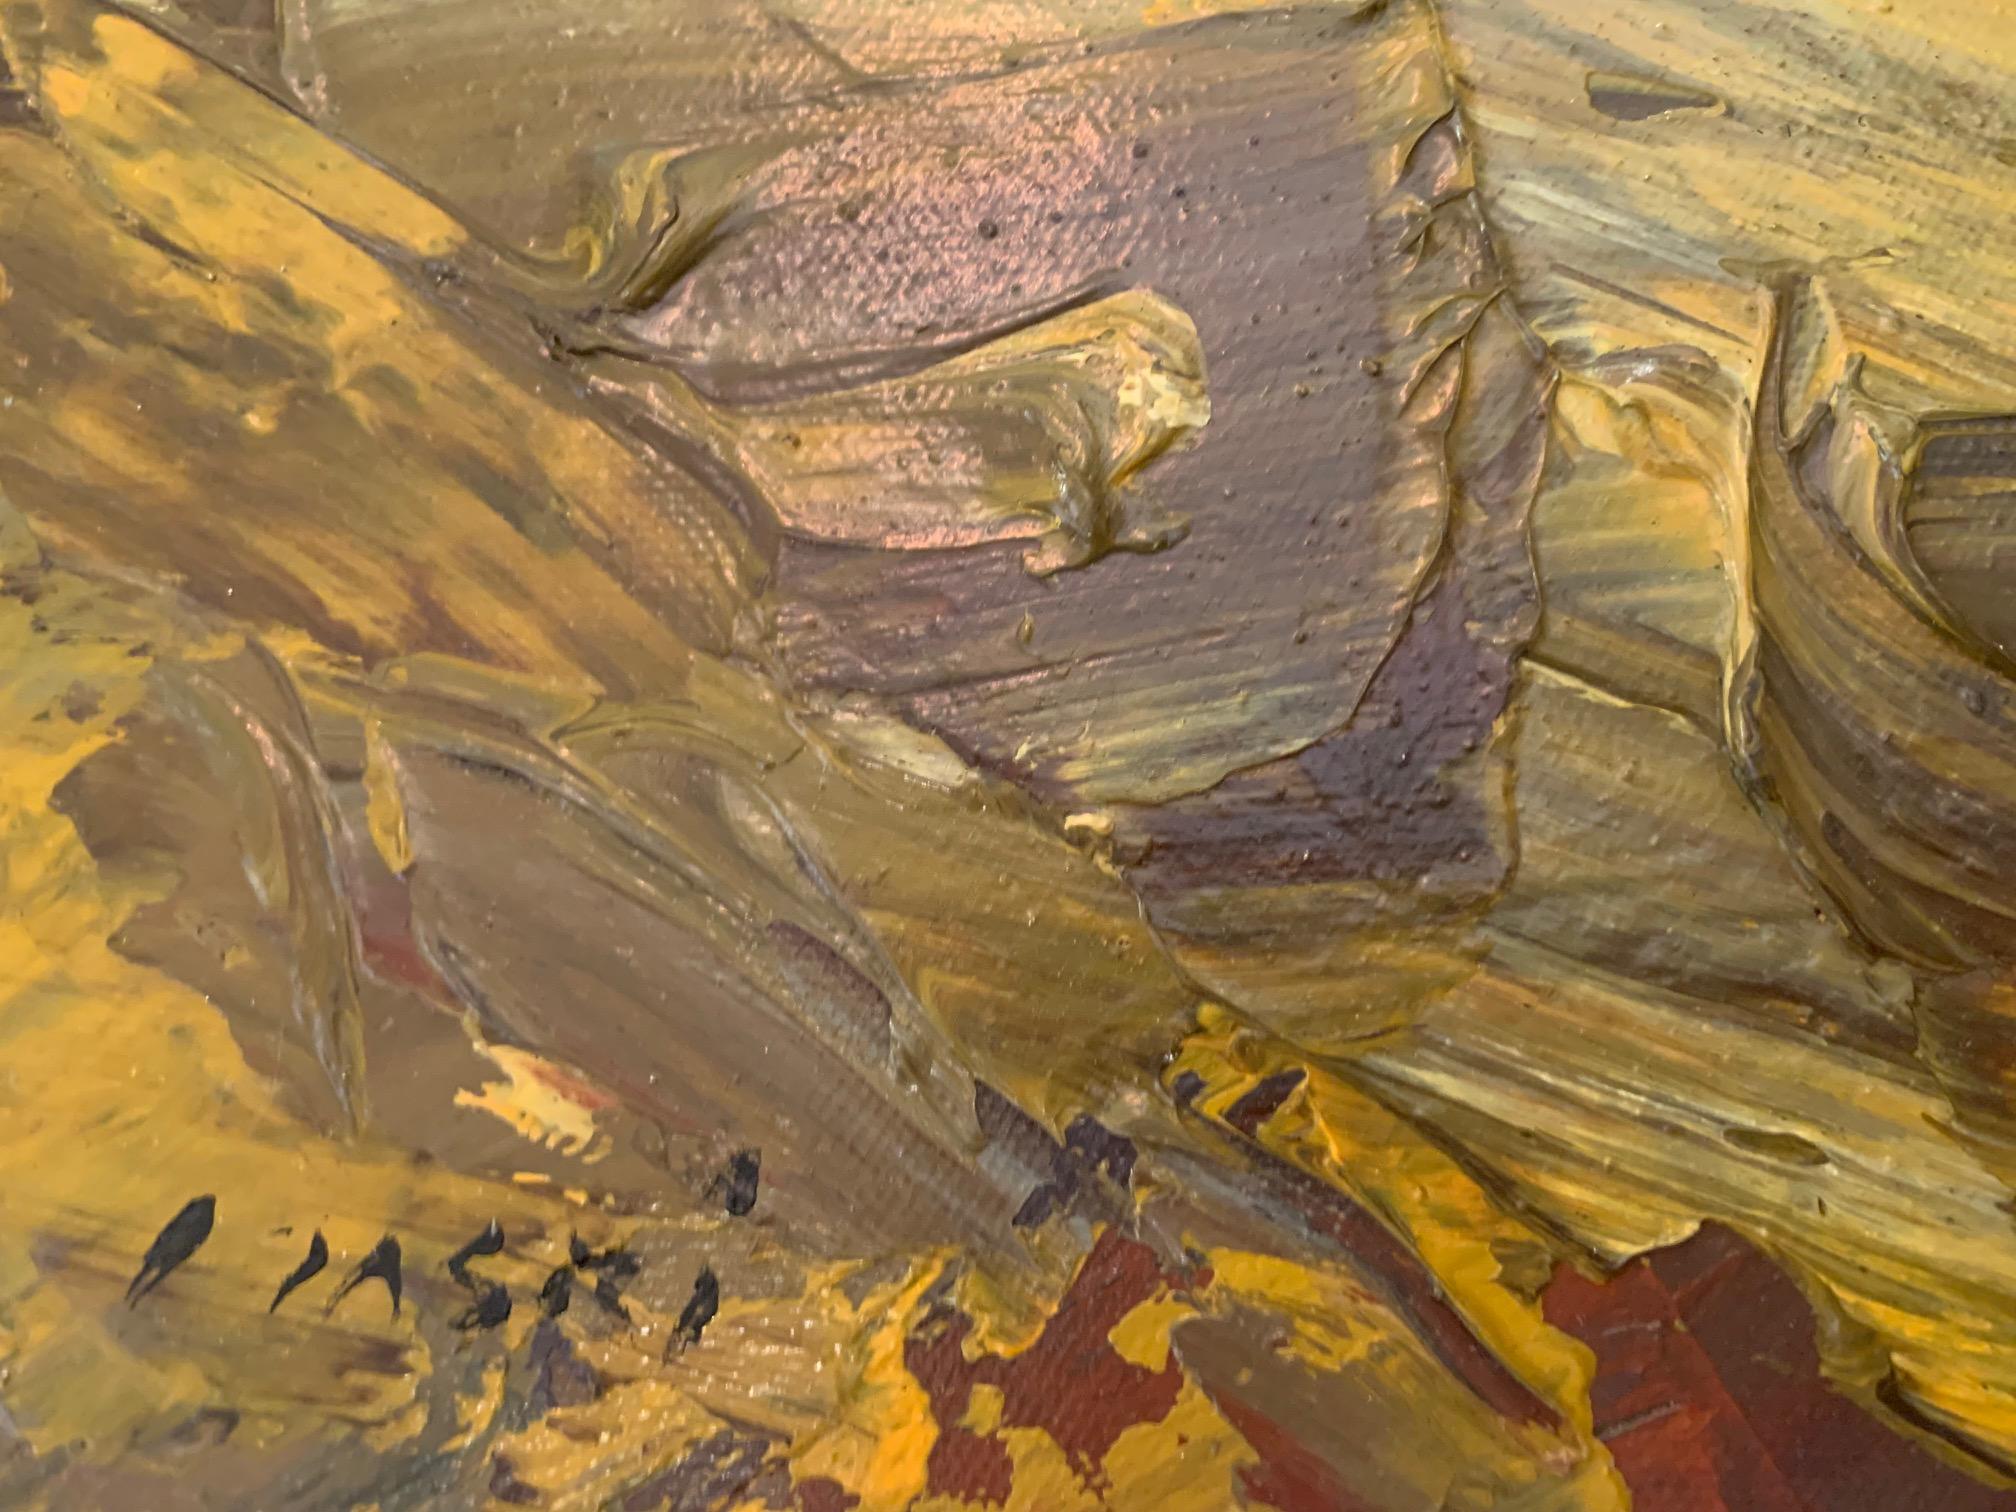 'Untitled ' oil on canvas by Masri - Landscape Art - Painting by Masri Hayssam